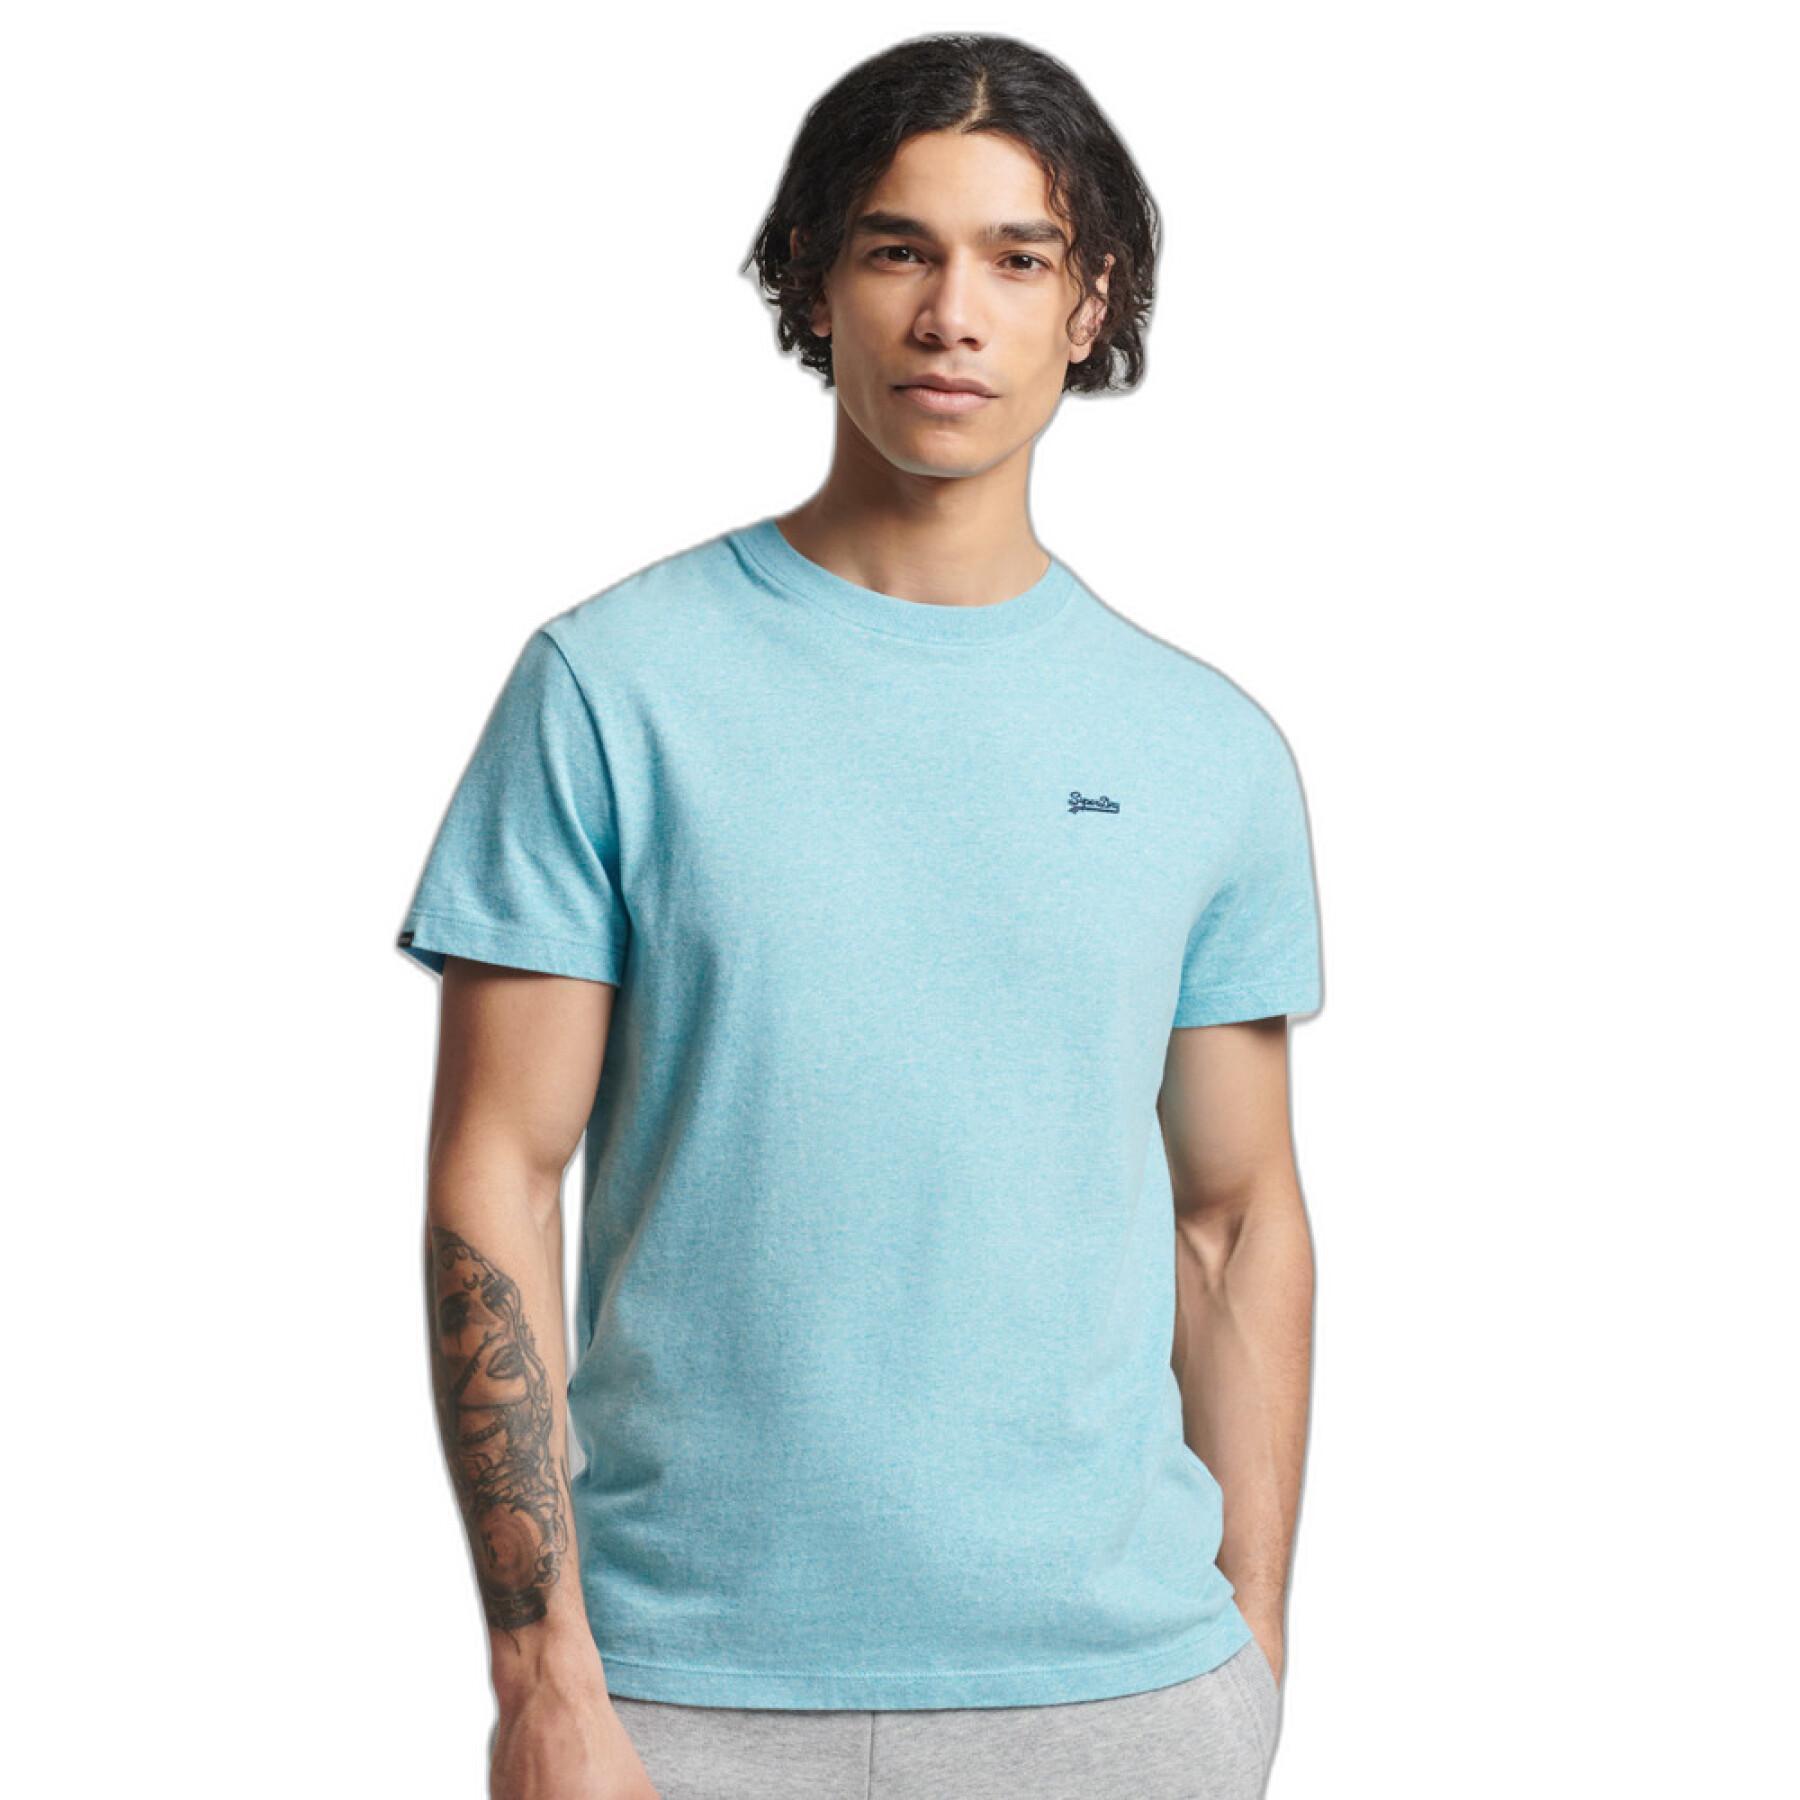 Micro embroidered organic cotton T-shirt Superdry